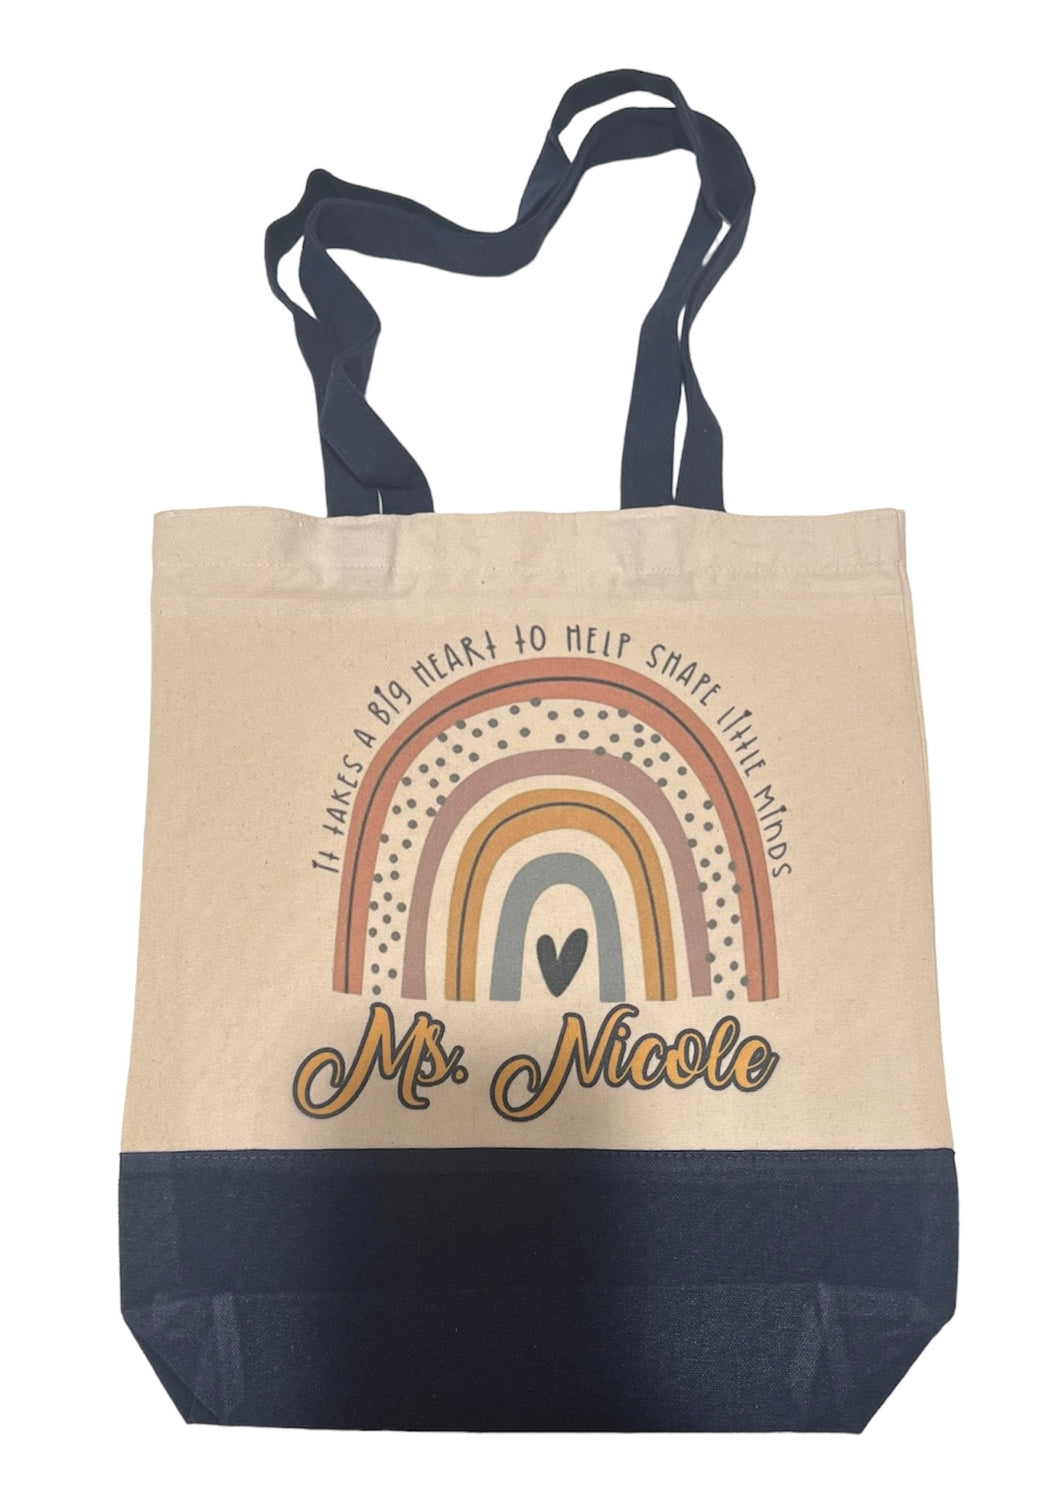 It takes a big heart to help shape little minds, Personalized tote bag